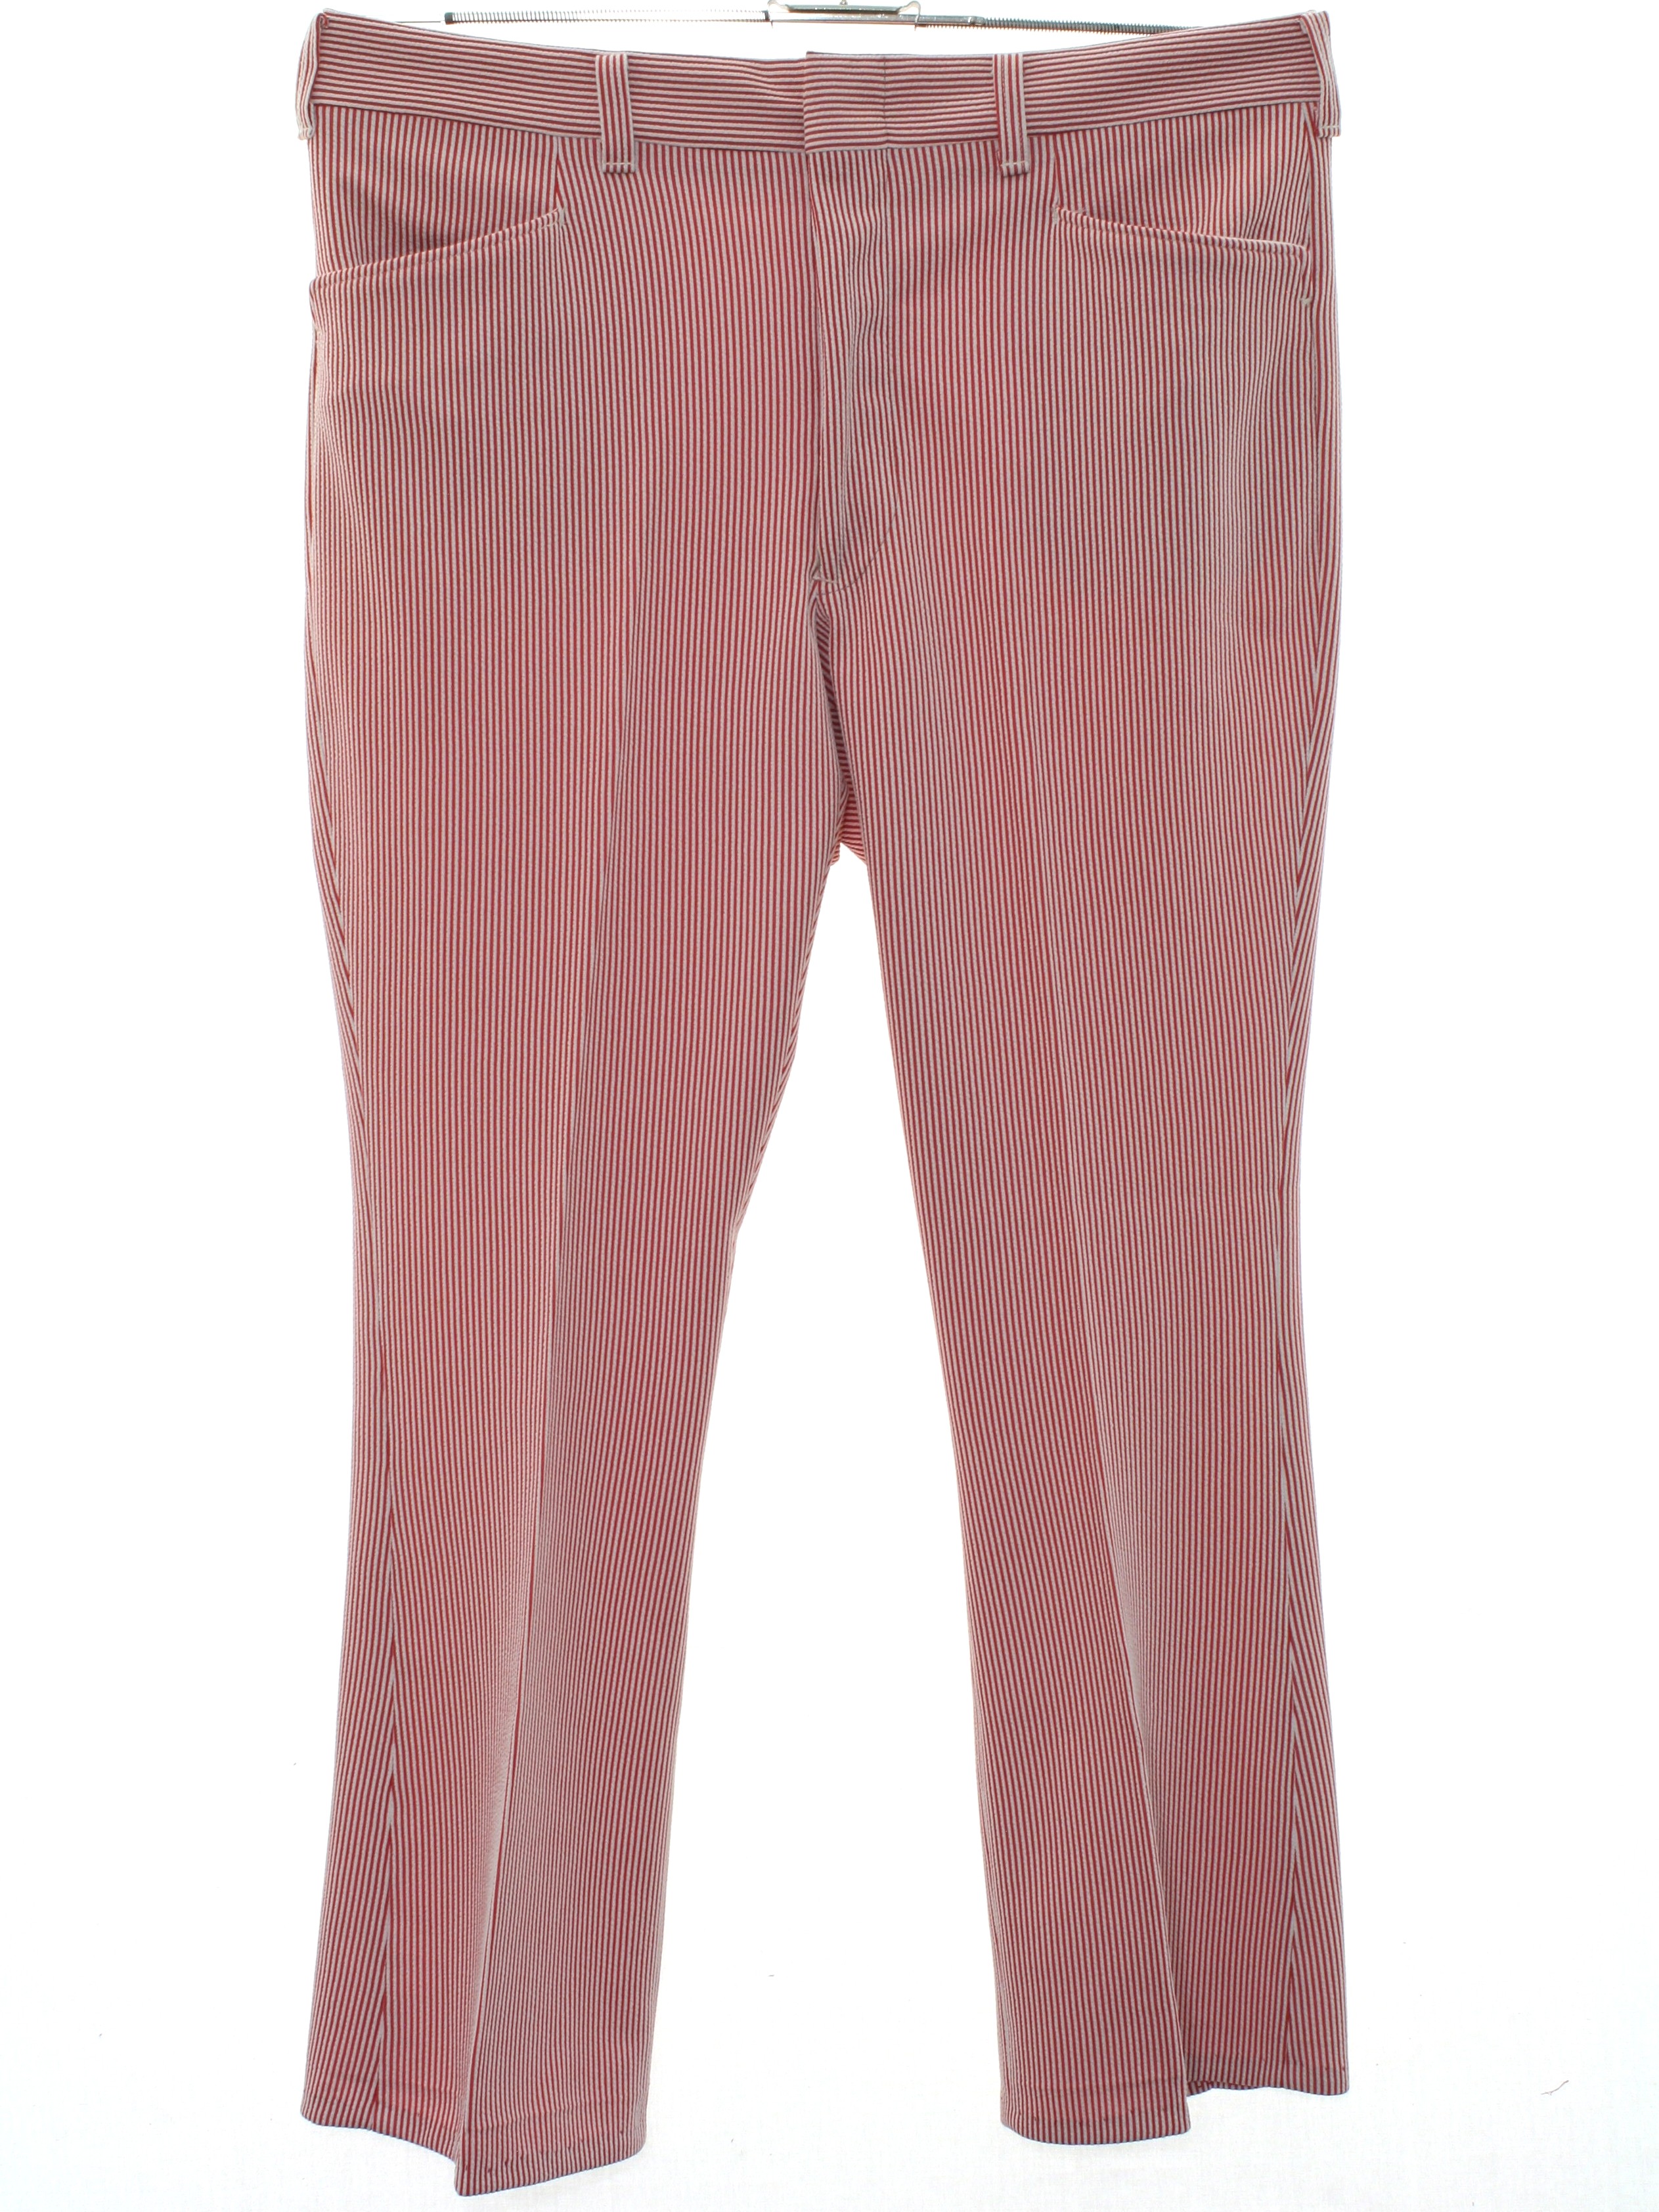 1970's Retro Flared Pants / Flares: 70s -Missing Label- Mens red and ...